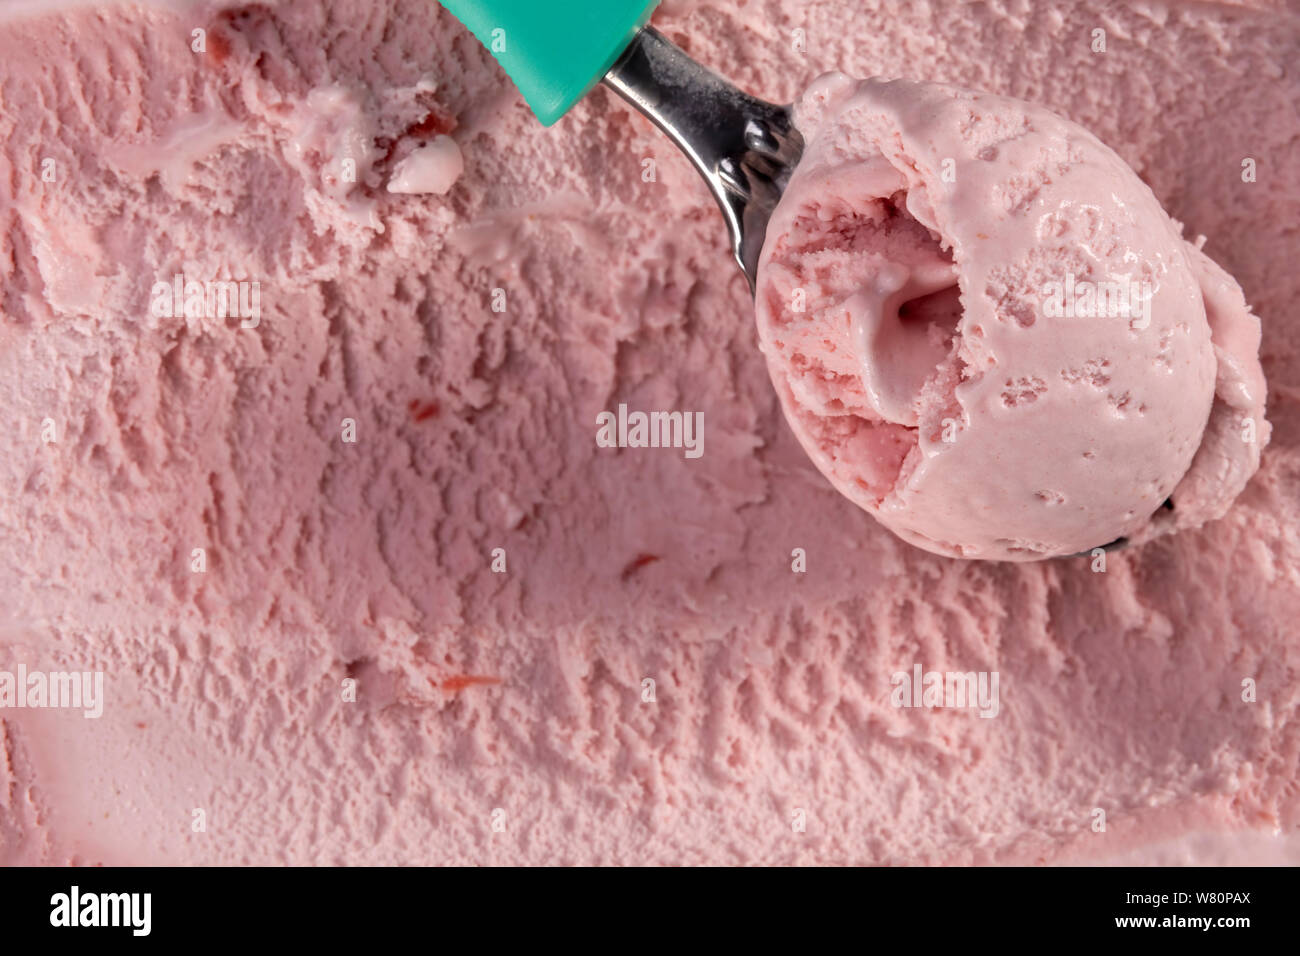 Top view of strawberry flavour ice cream with scoop in box. Focus on scoop with ice cream. Stock Photo